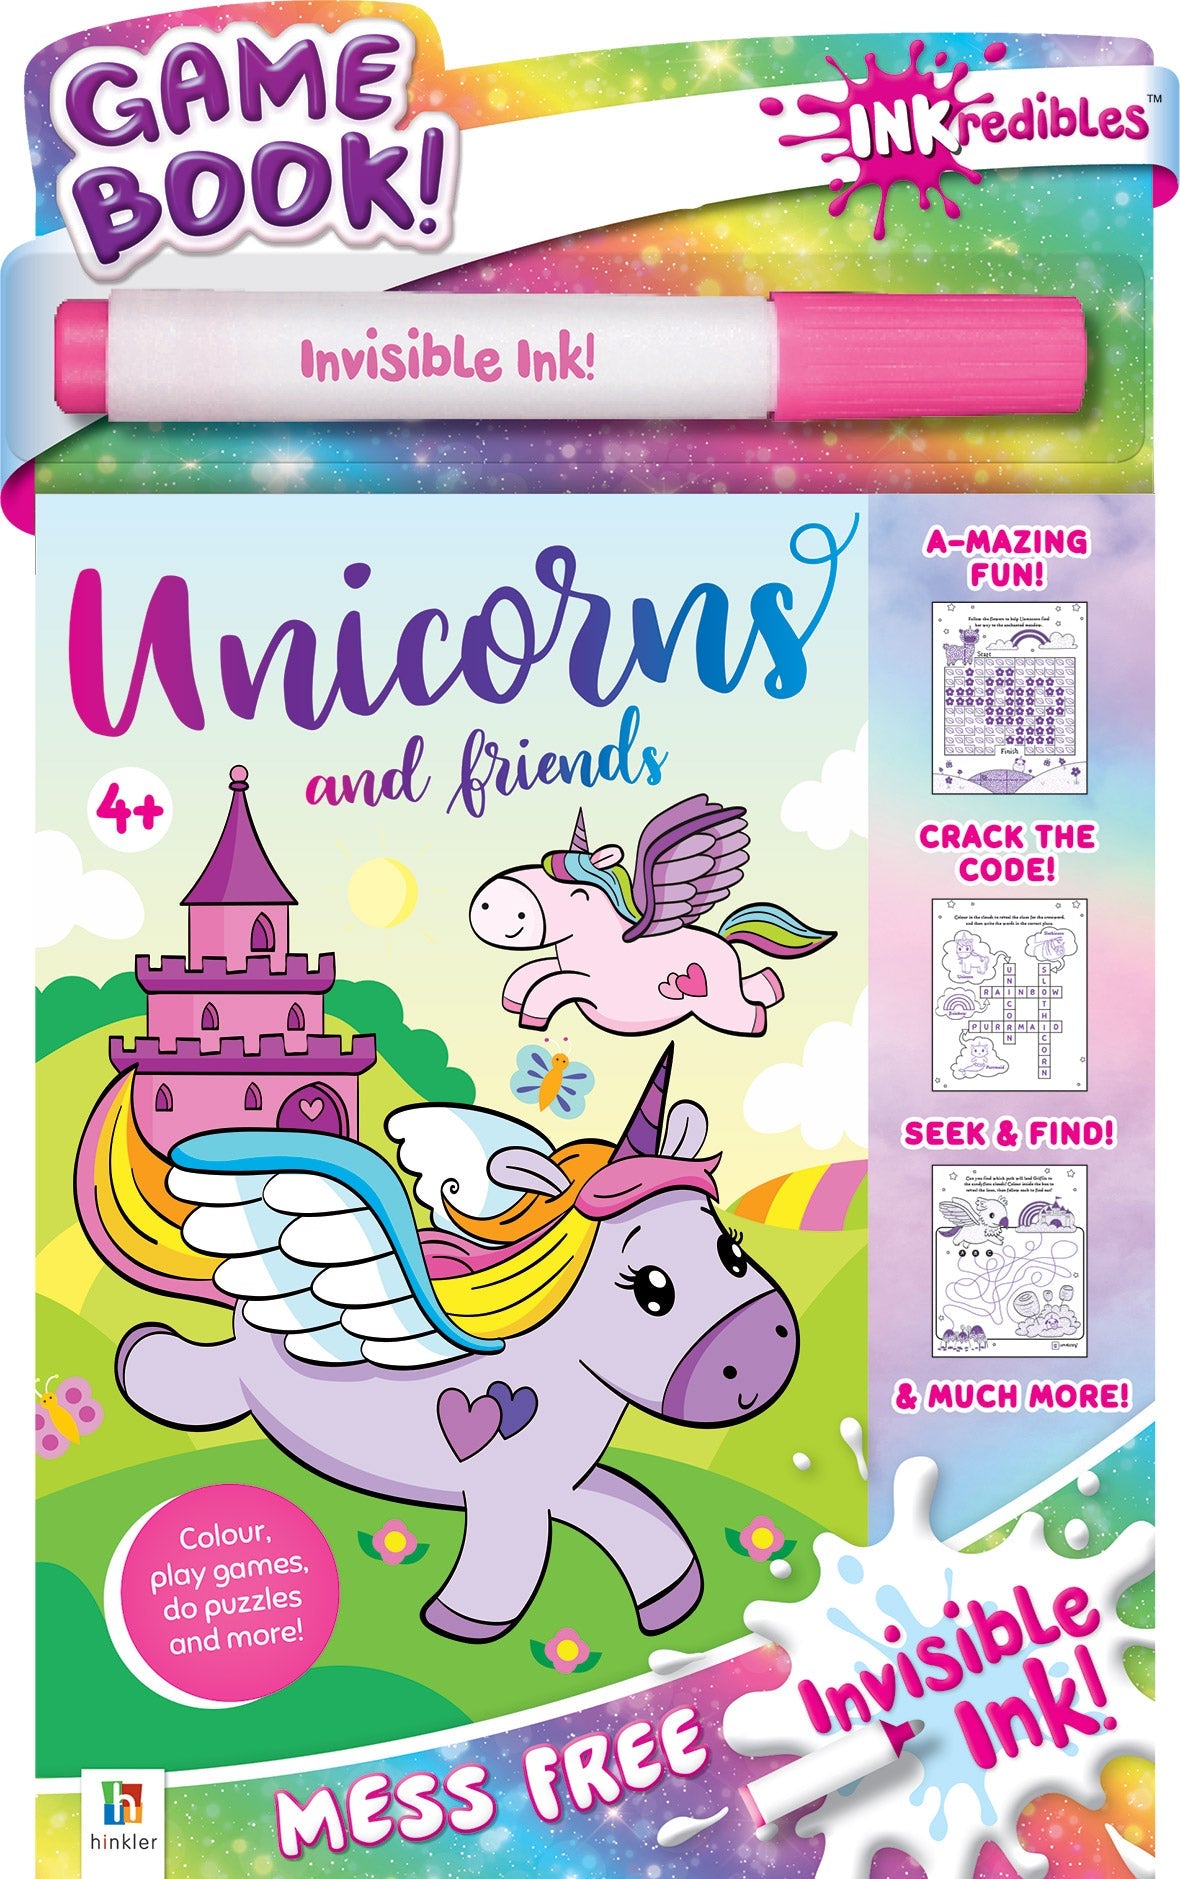 Inkredibles Invisible Ink Unicorns and Friends The Toy Wagon